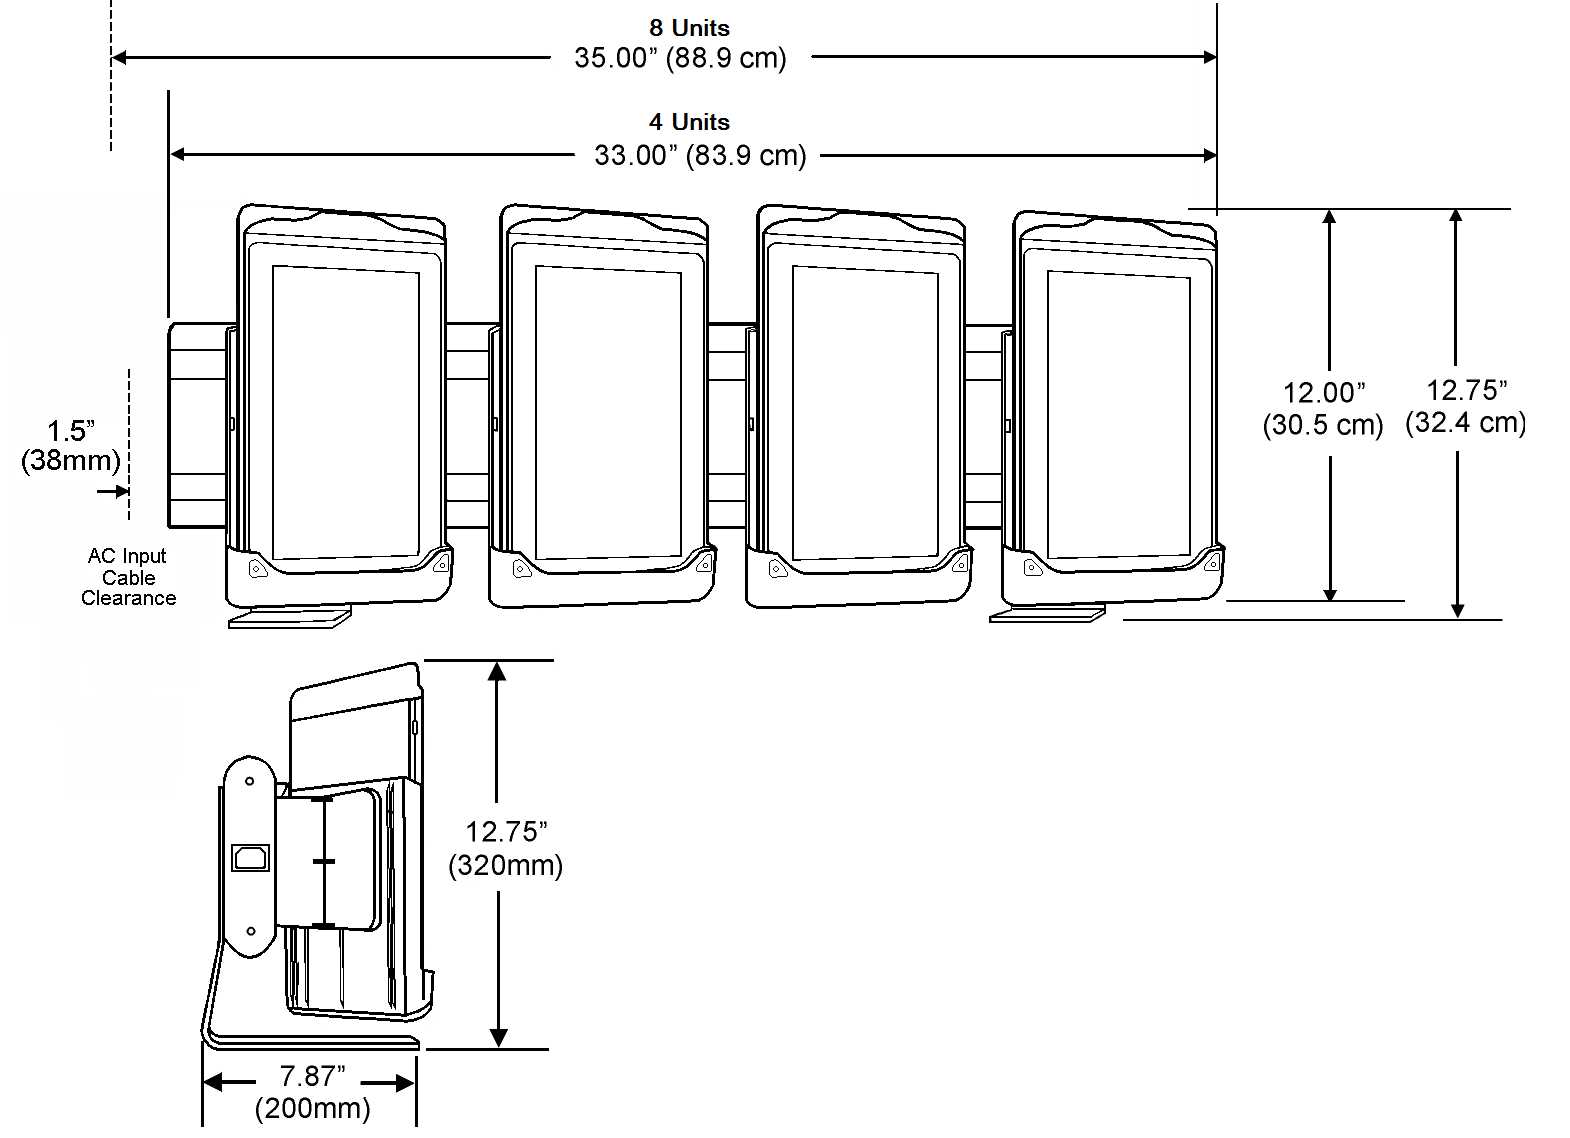 This figure shows the MICROS tablet multi-unit charger - surface mount equipment dimensions.